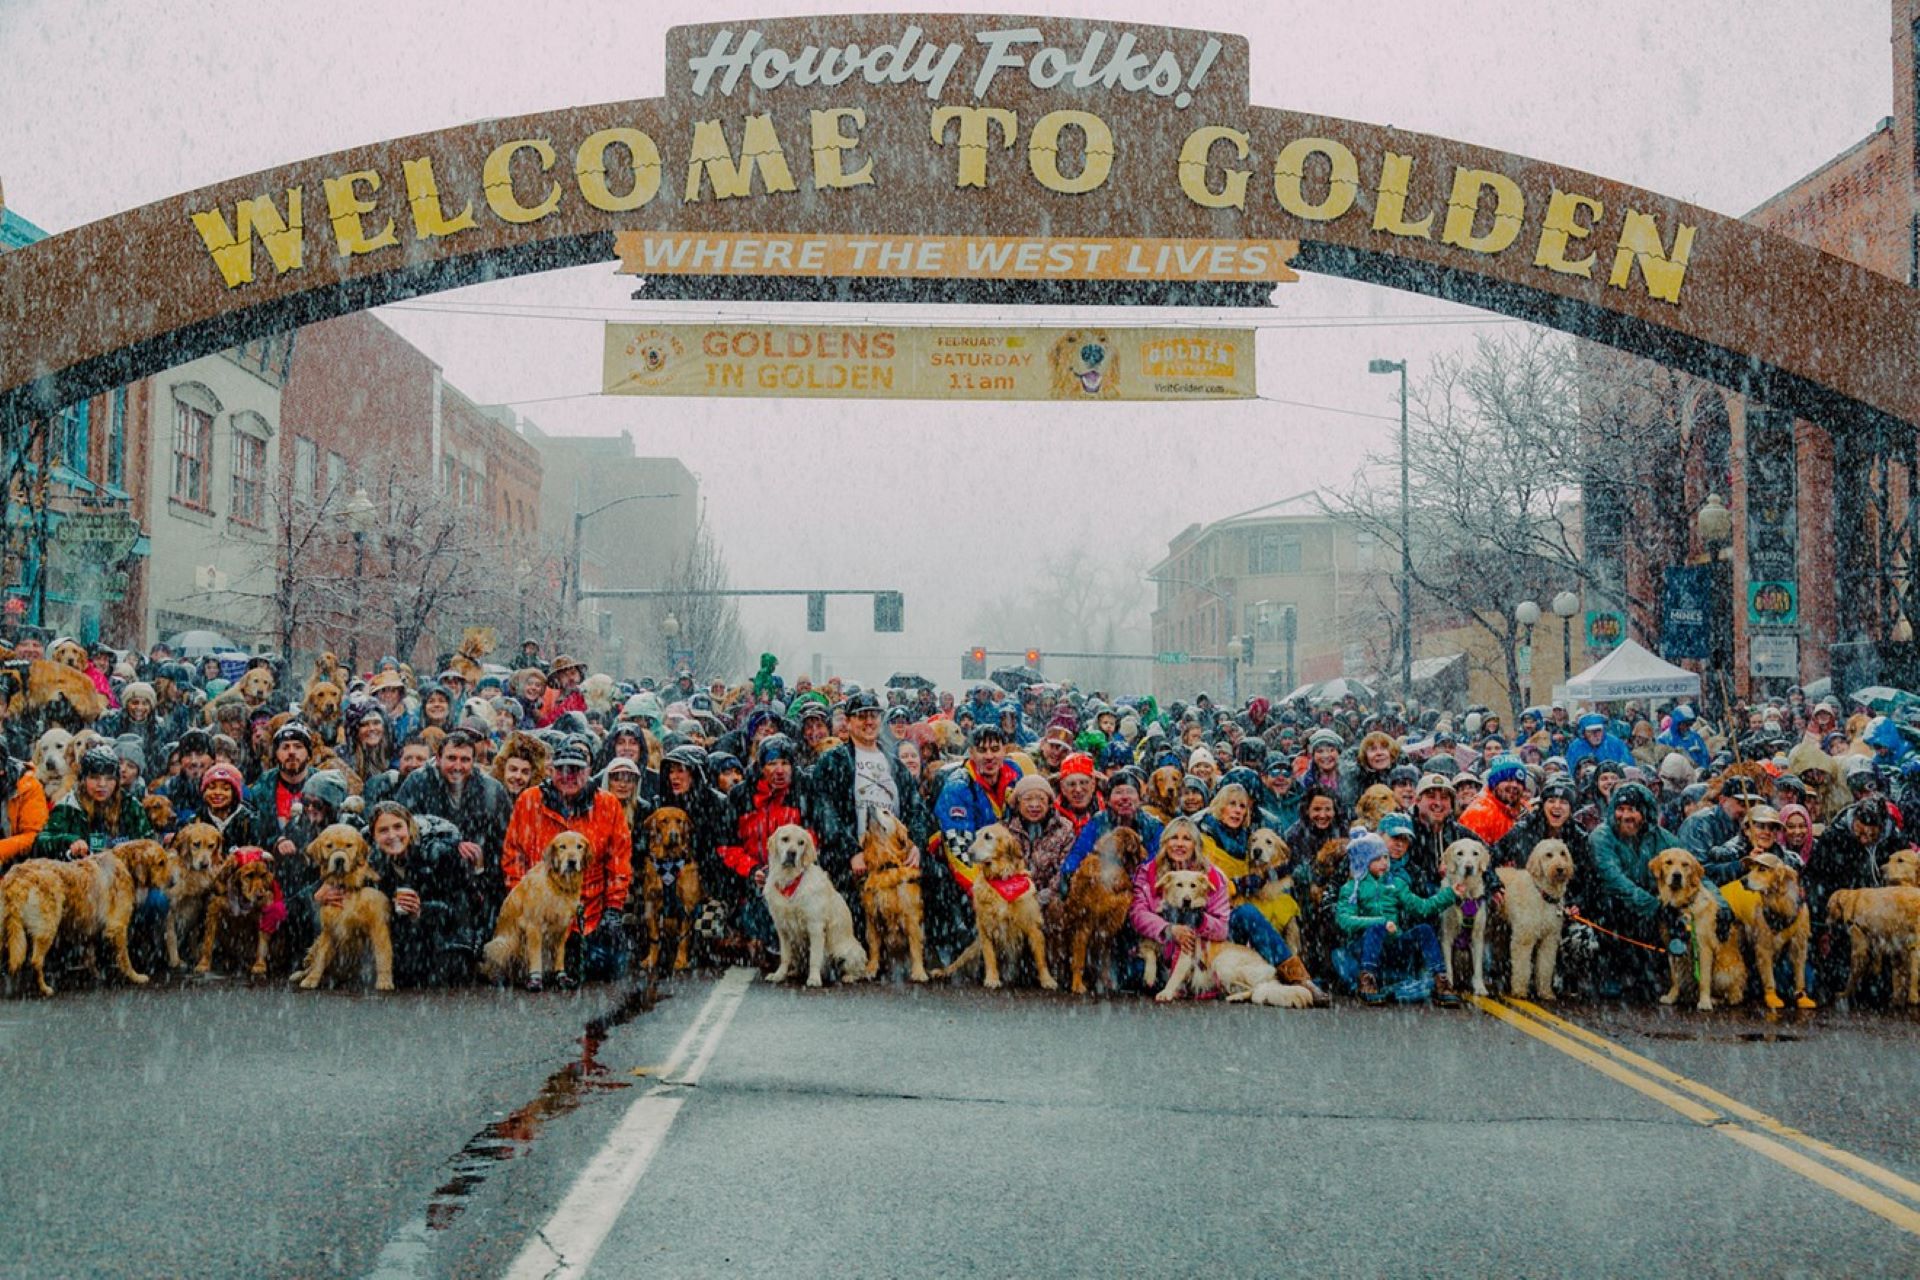 Thousands Of Golden Retrievers Face The Snow For Their Annual Meetup In Golden, Colorado